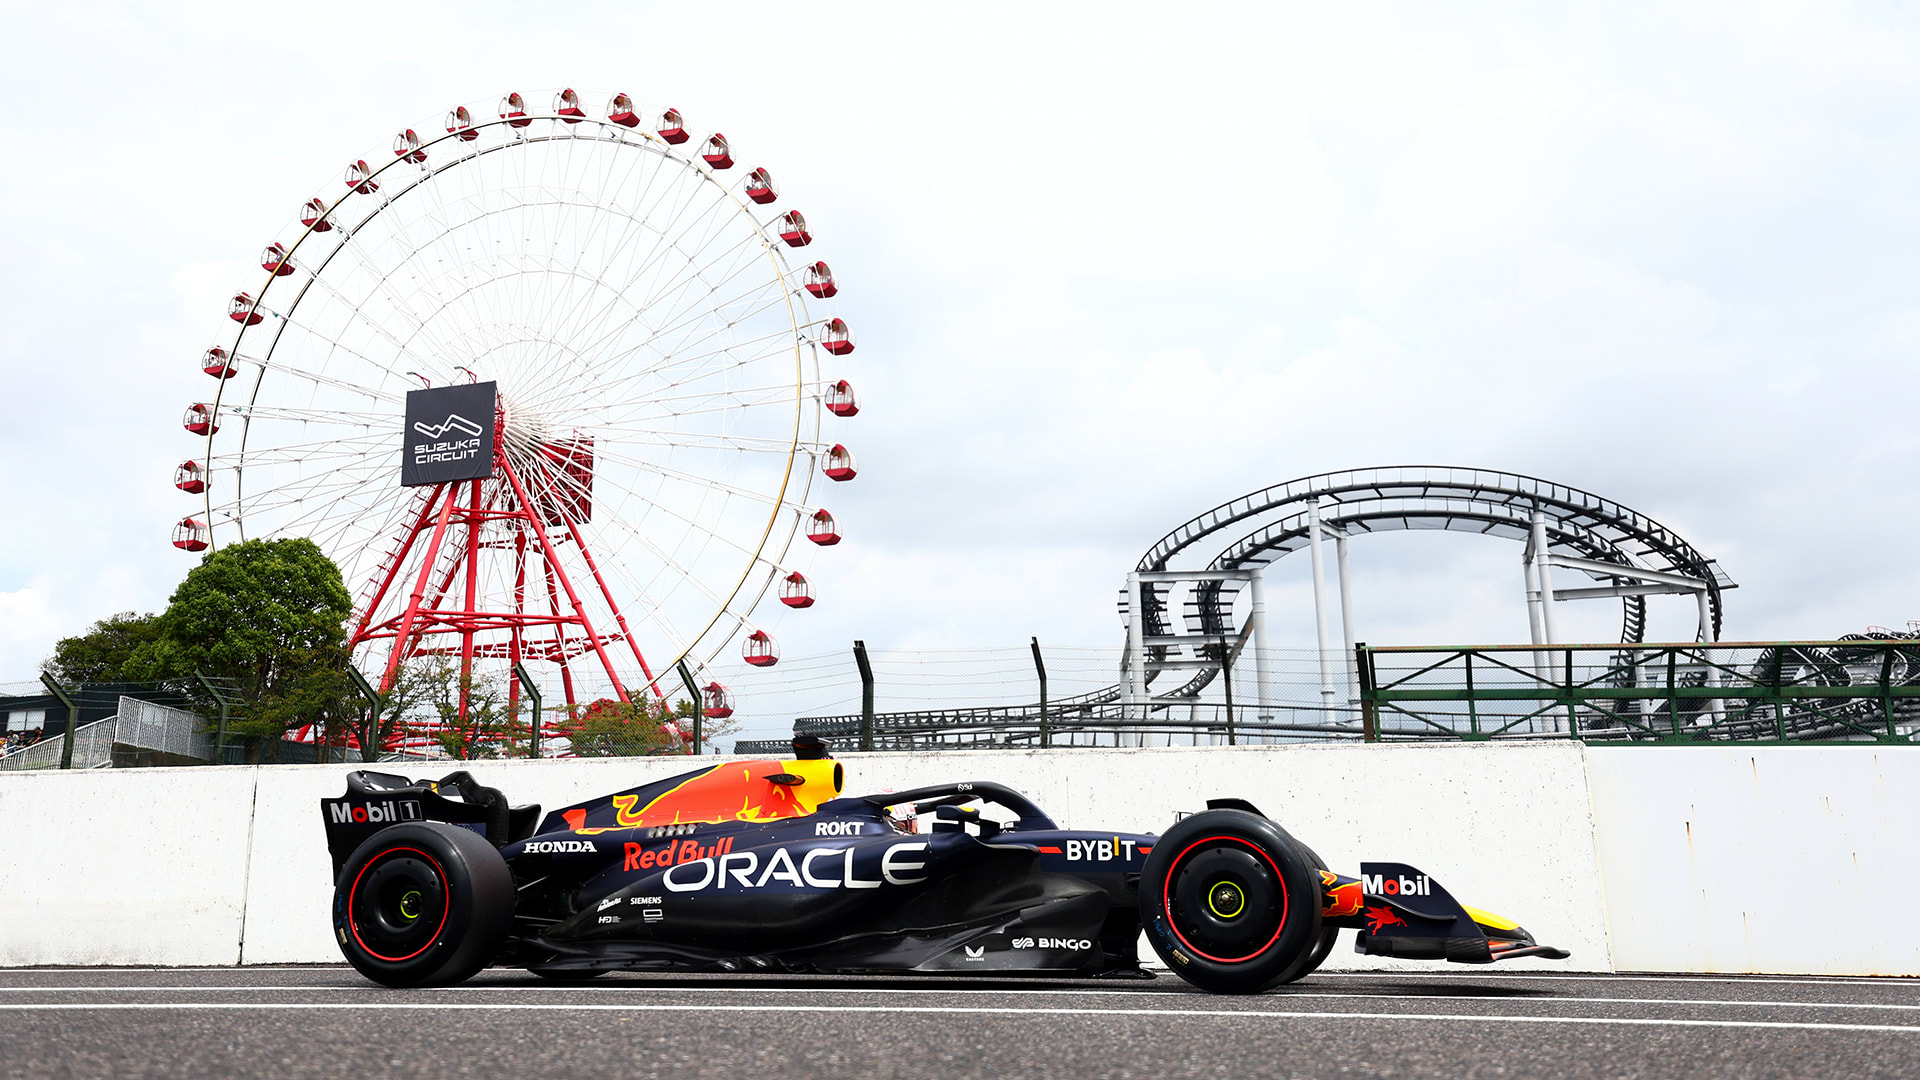 2023 Japanese Grand Prix FP2 report and highlights Verstappen leads Leclerc and Norris to stay on top during second practice at Suzuka Formula 1®